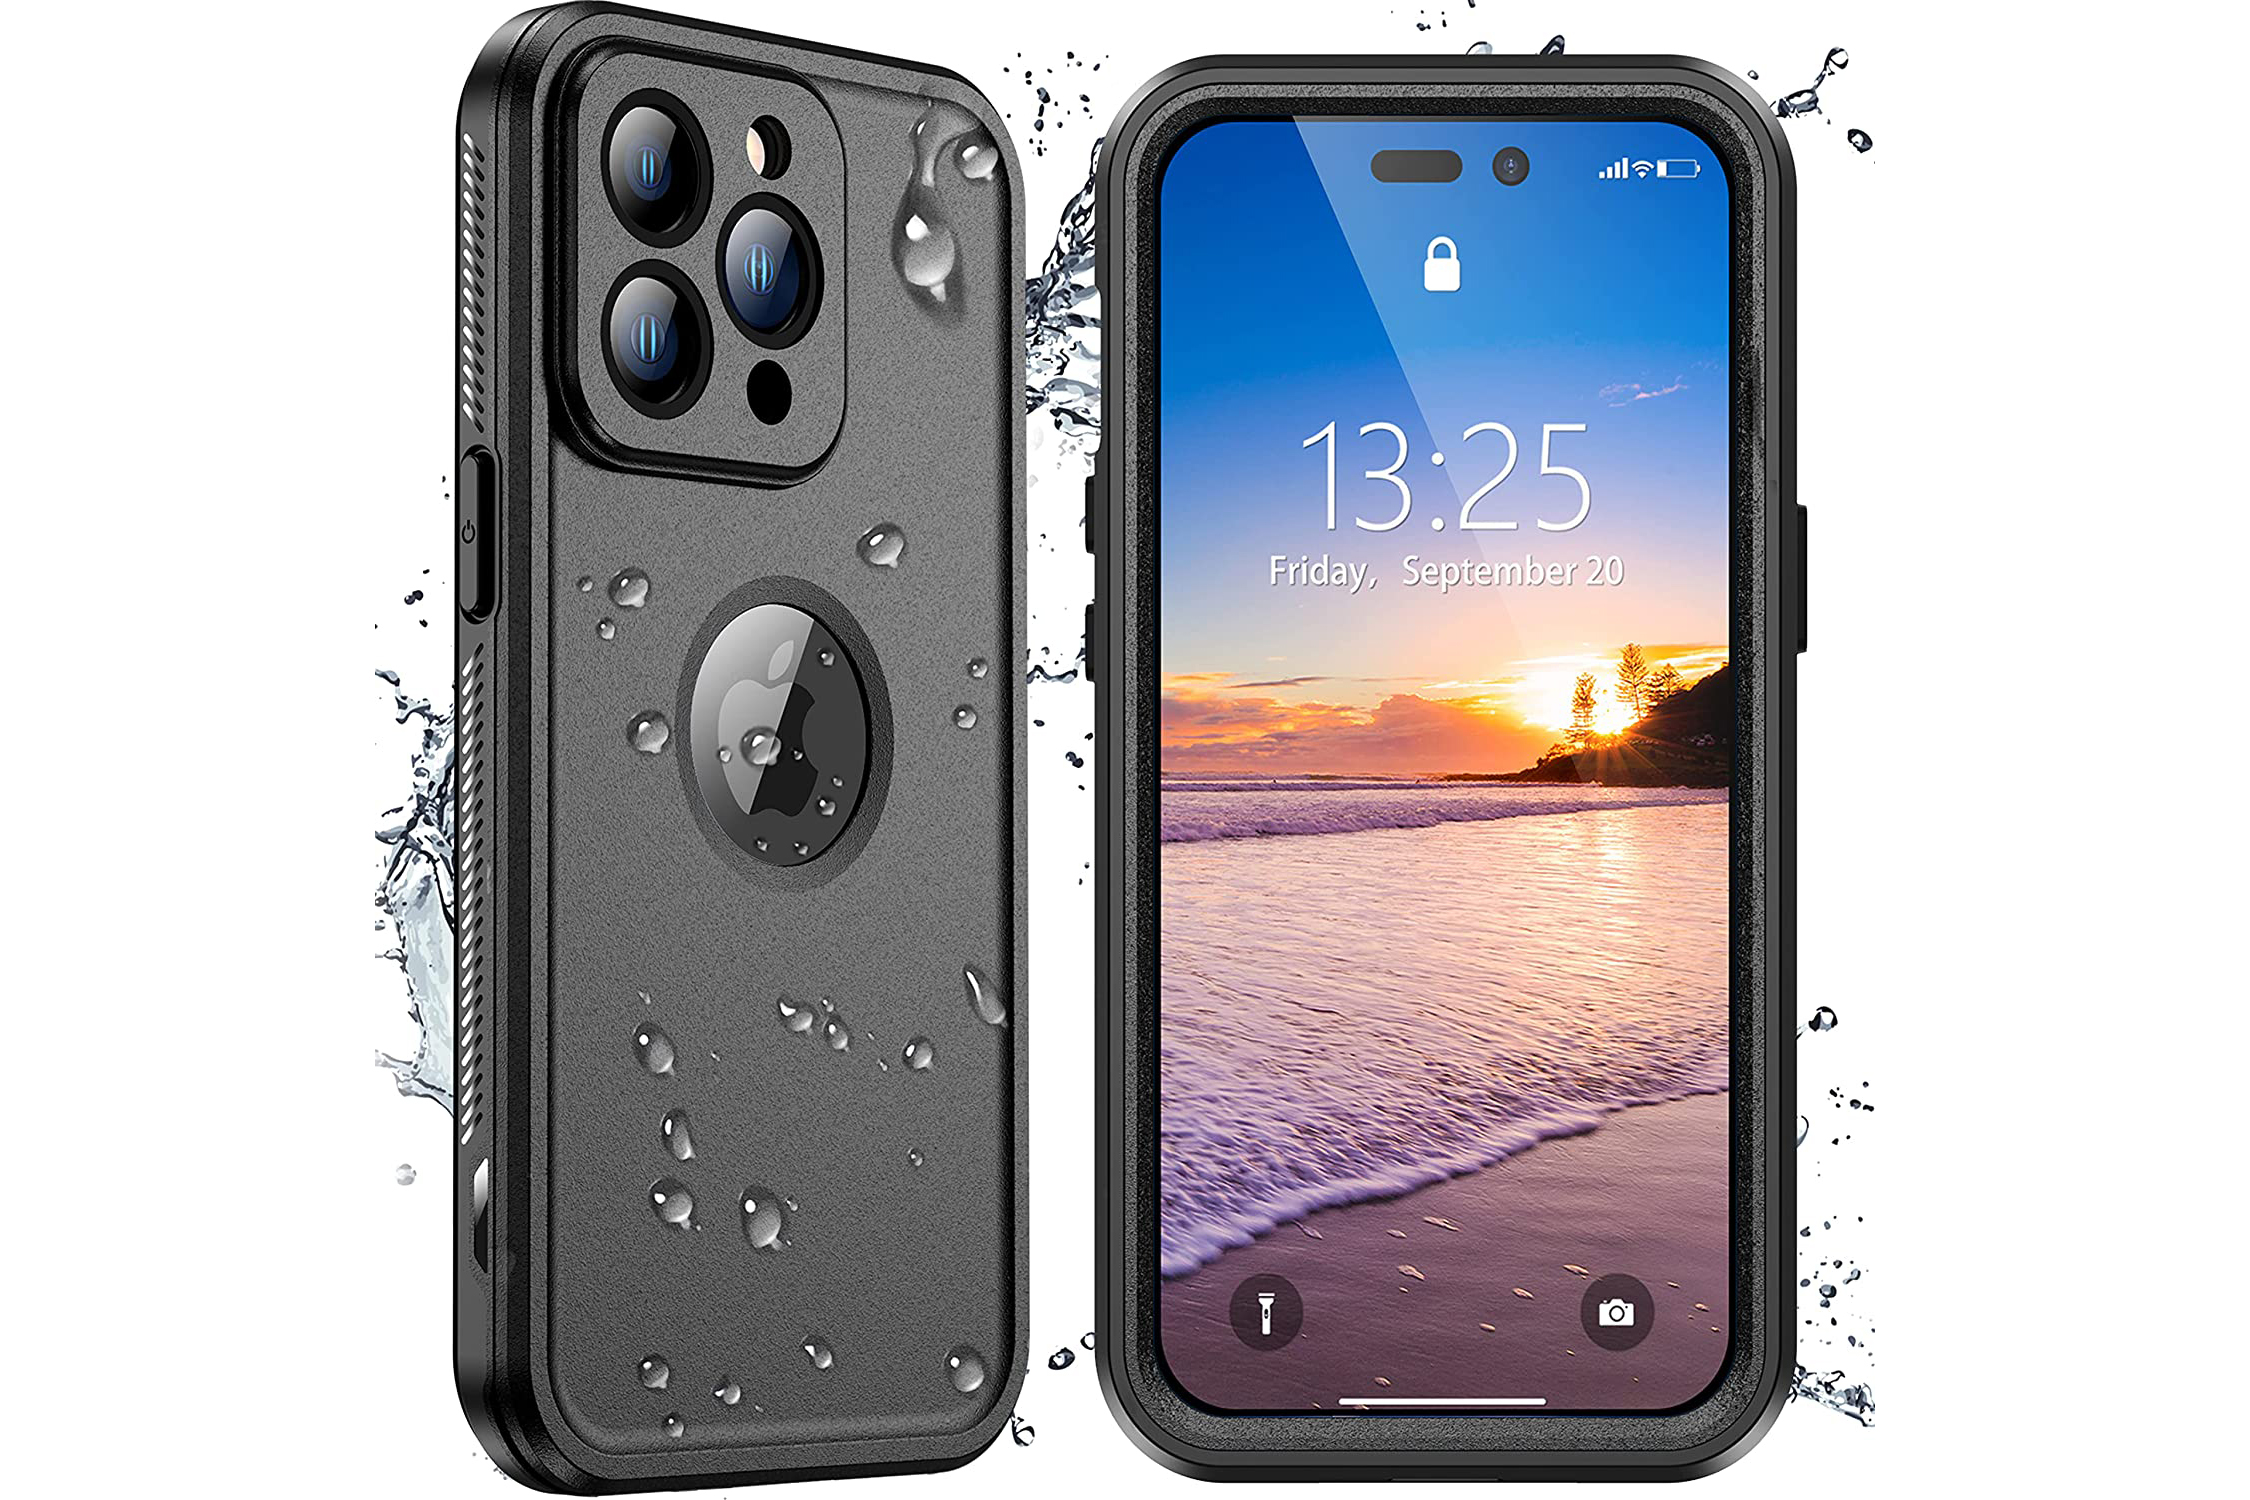 https://www.digitaltrends.com/wp-content/uploads/2022/09/SPIDERCASE-for-iPhone-14-Pro-.jpg?fit=720%2C720&p=1